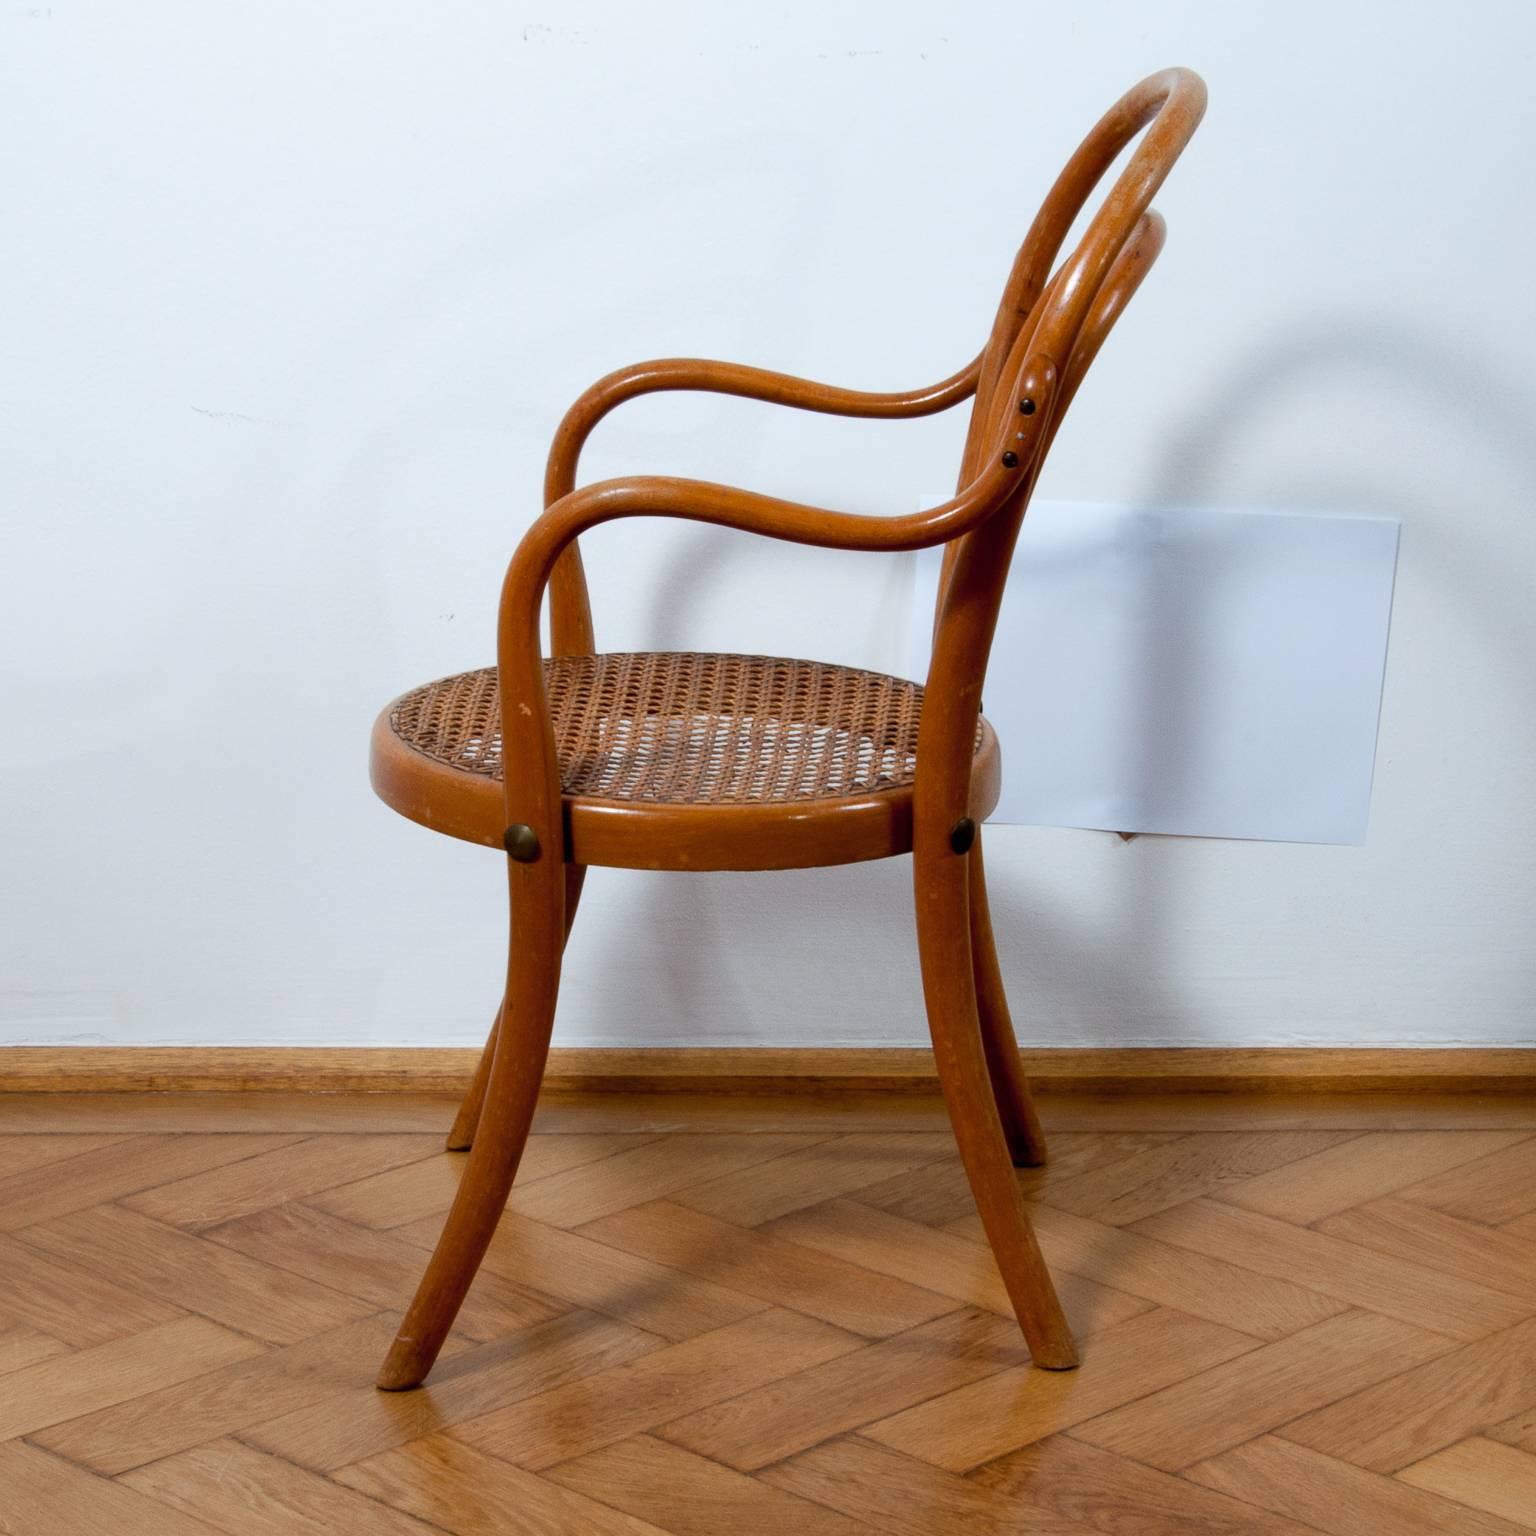 Very rare and antique Thonet chair, which was produced between 1910-1929 and was designed in 1880 by the Gebruder Thonet.
The company Thonet was founded by Michael Thonet and was greatly expanded by their sons. They perfected the process of bending